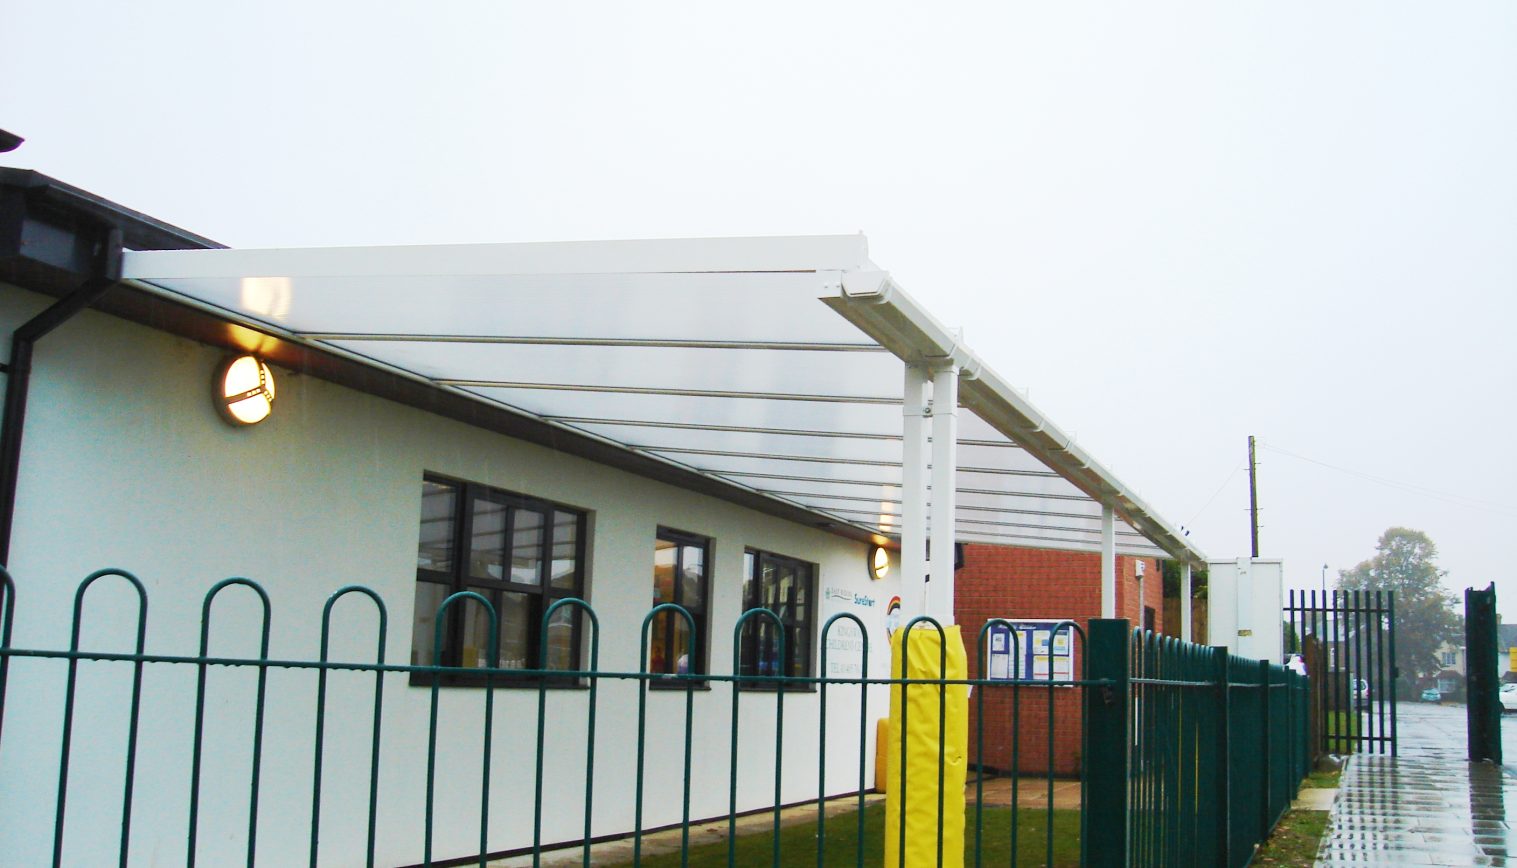 Kingsway Children’s Centre – Wall Mounted Canopy